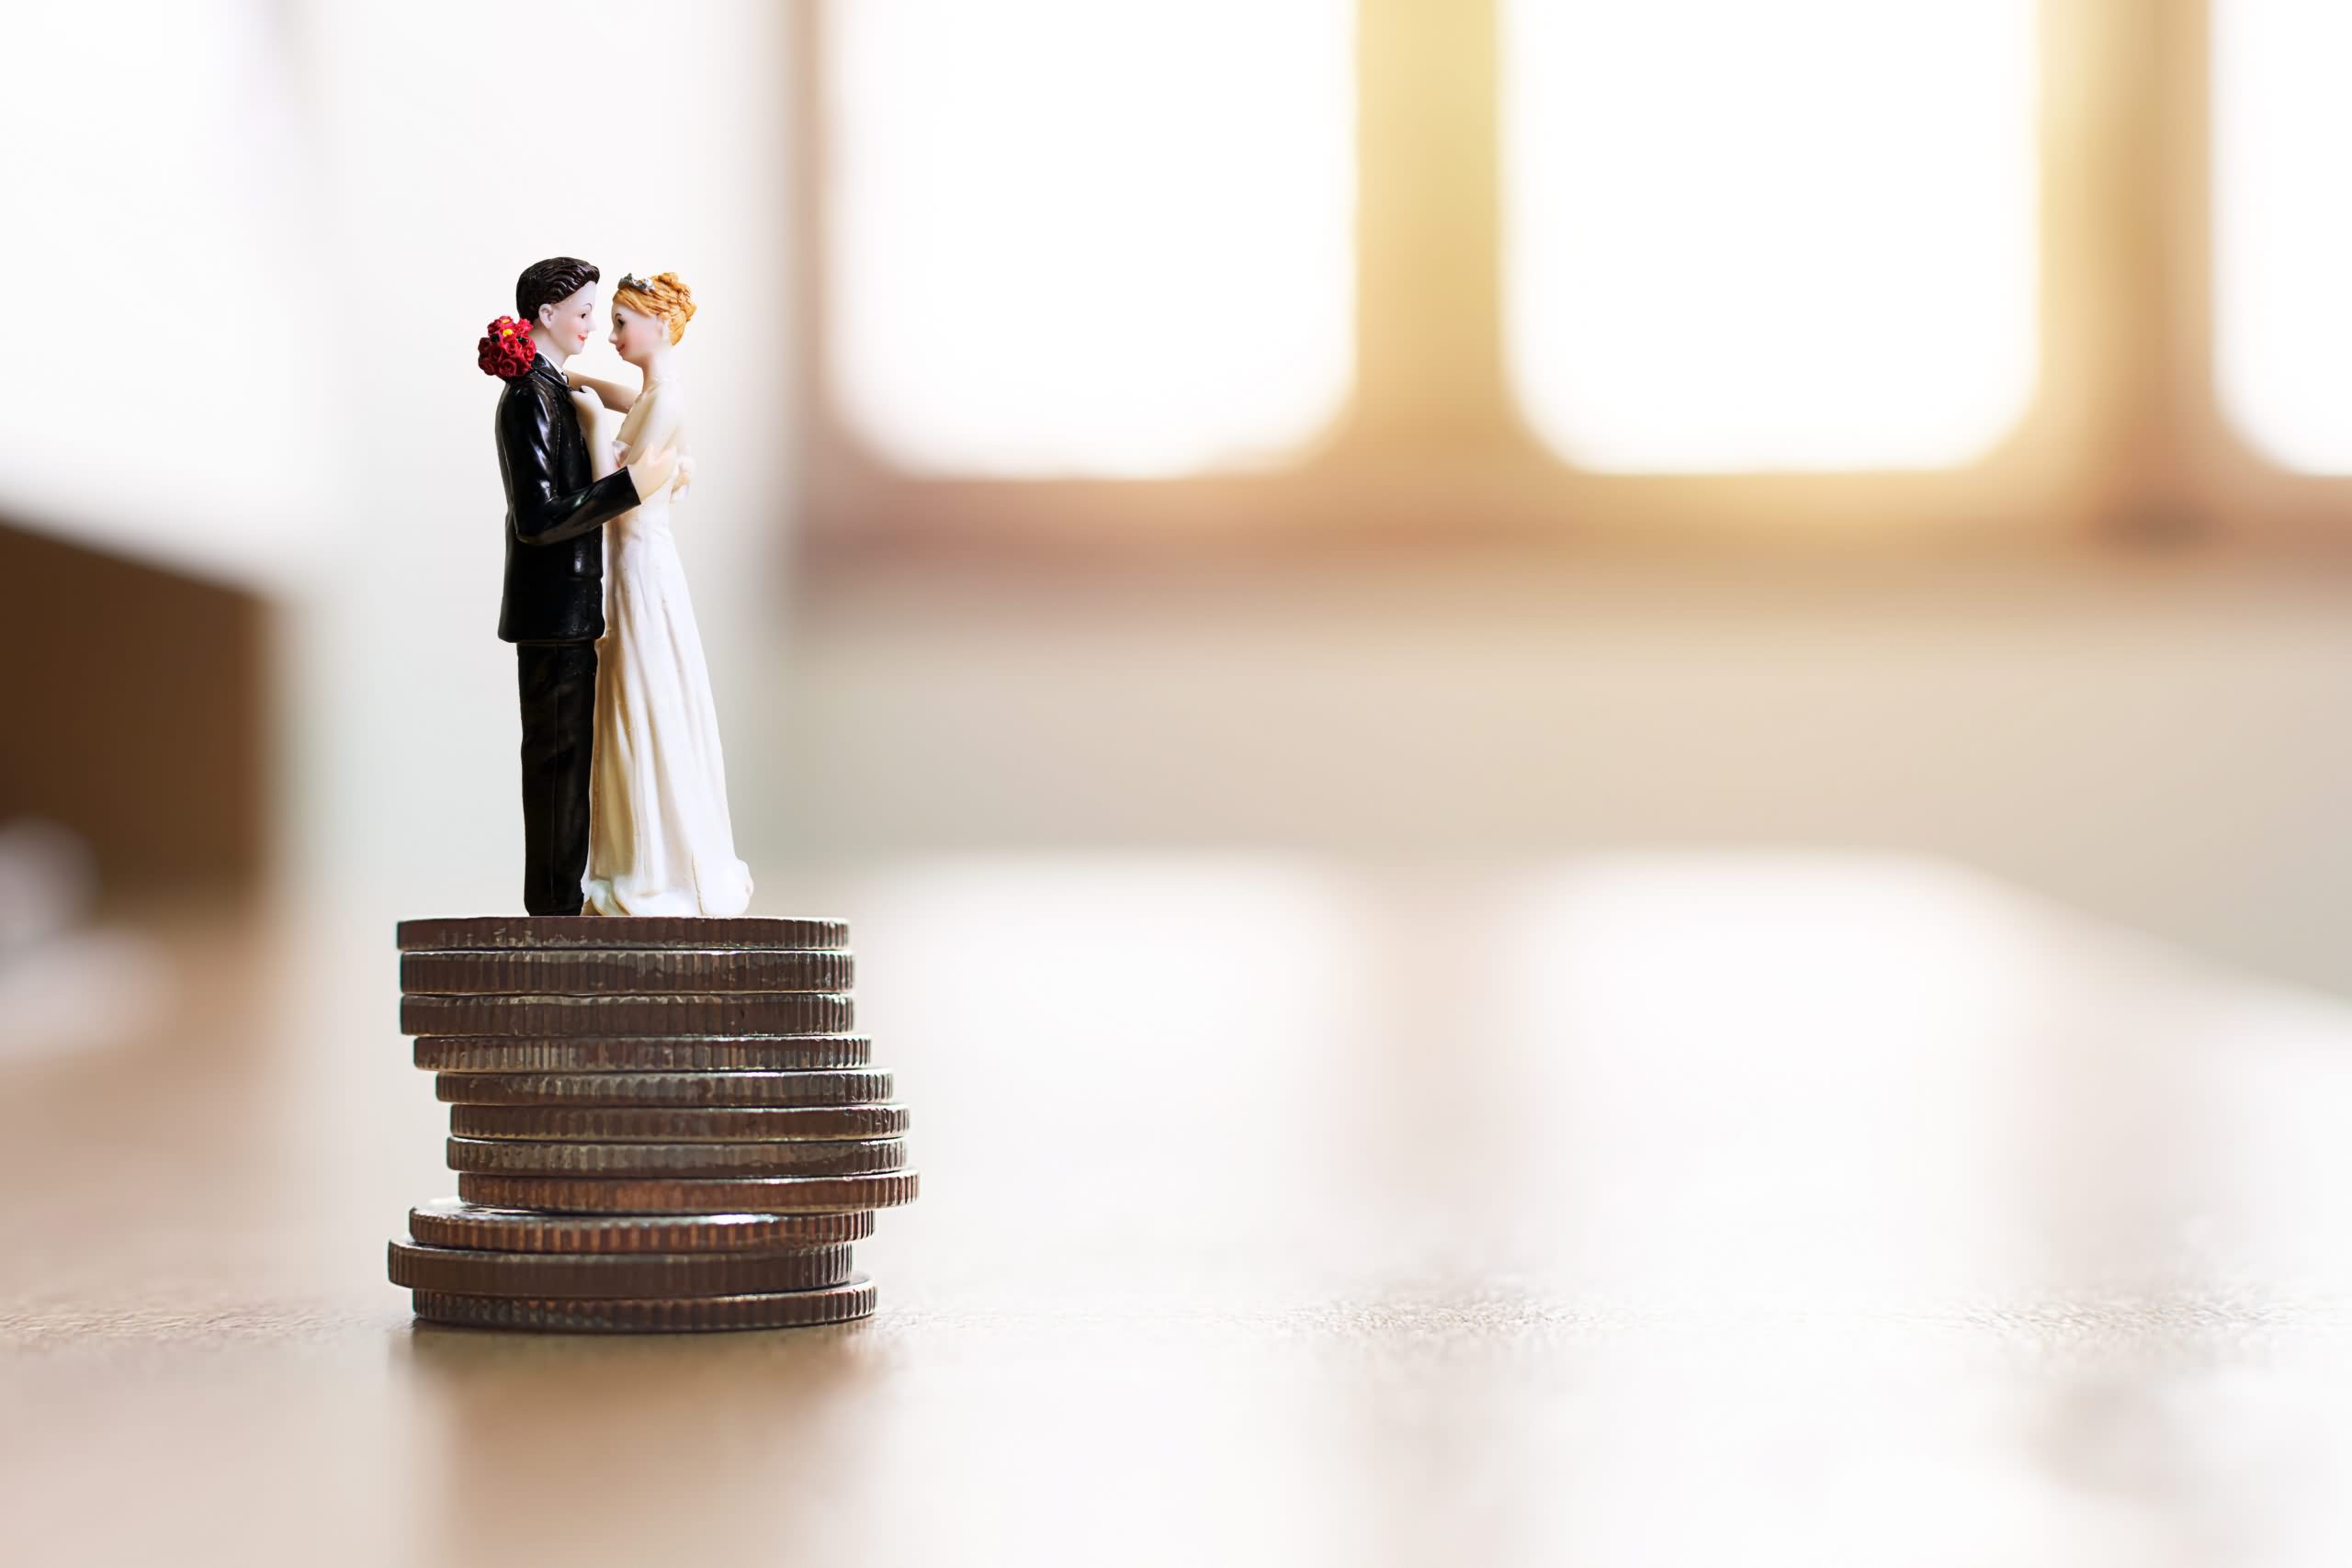 Terry Savage: Marriage and Money